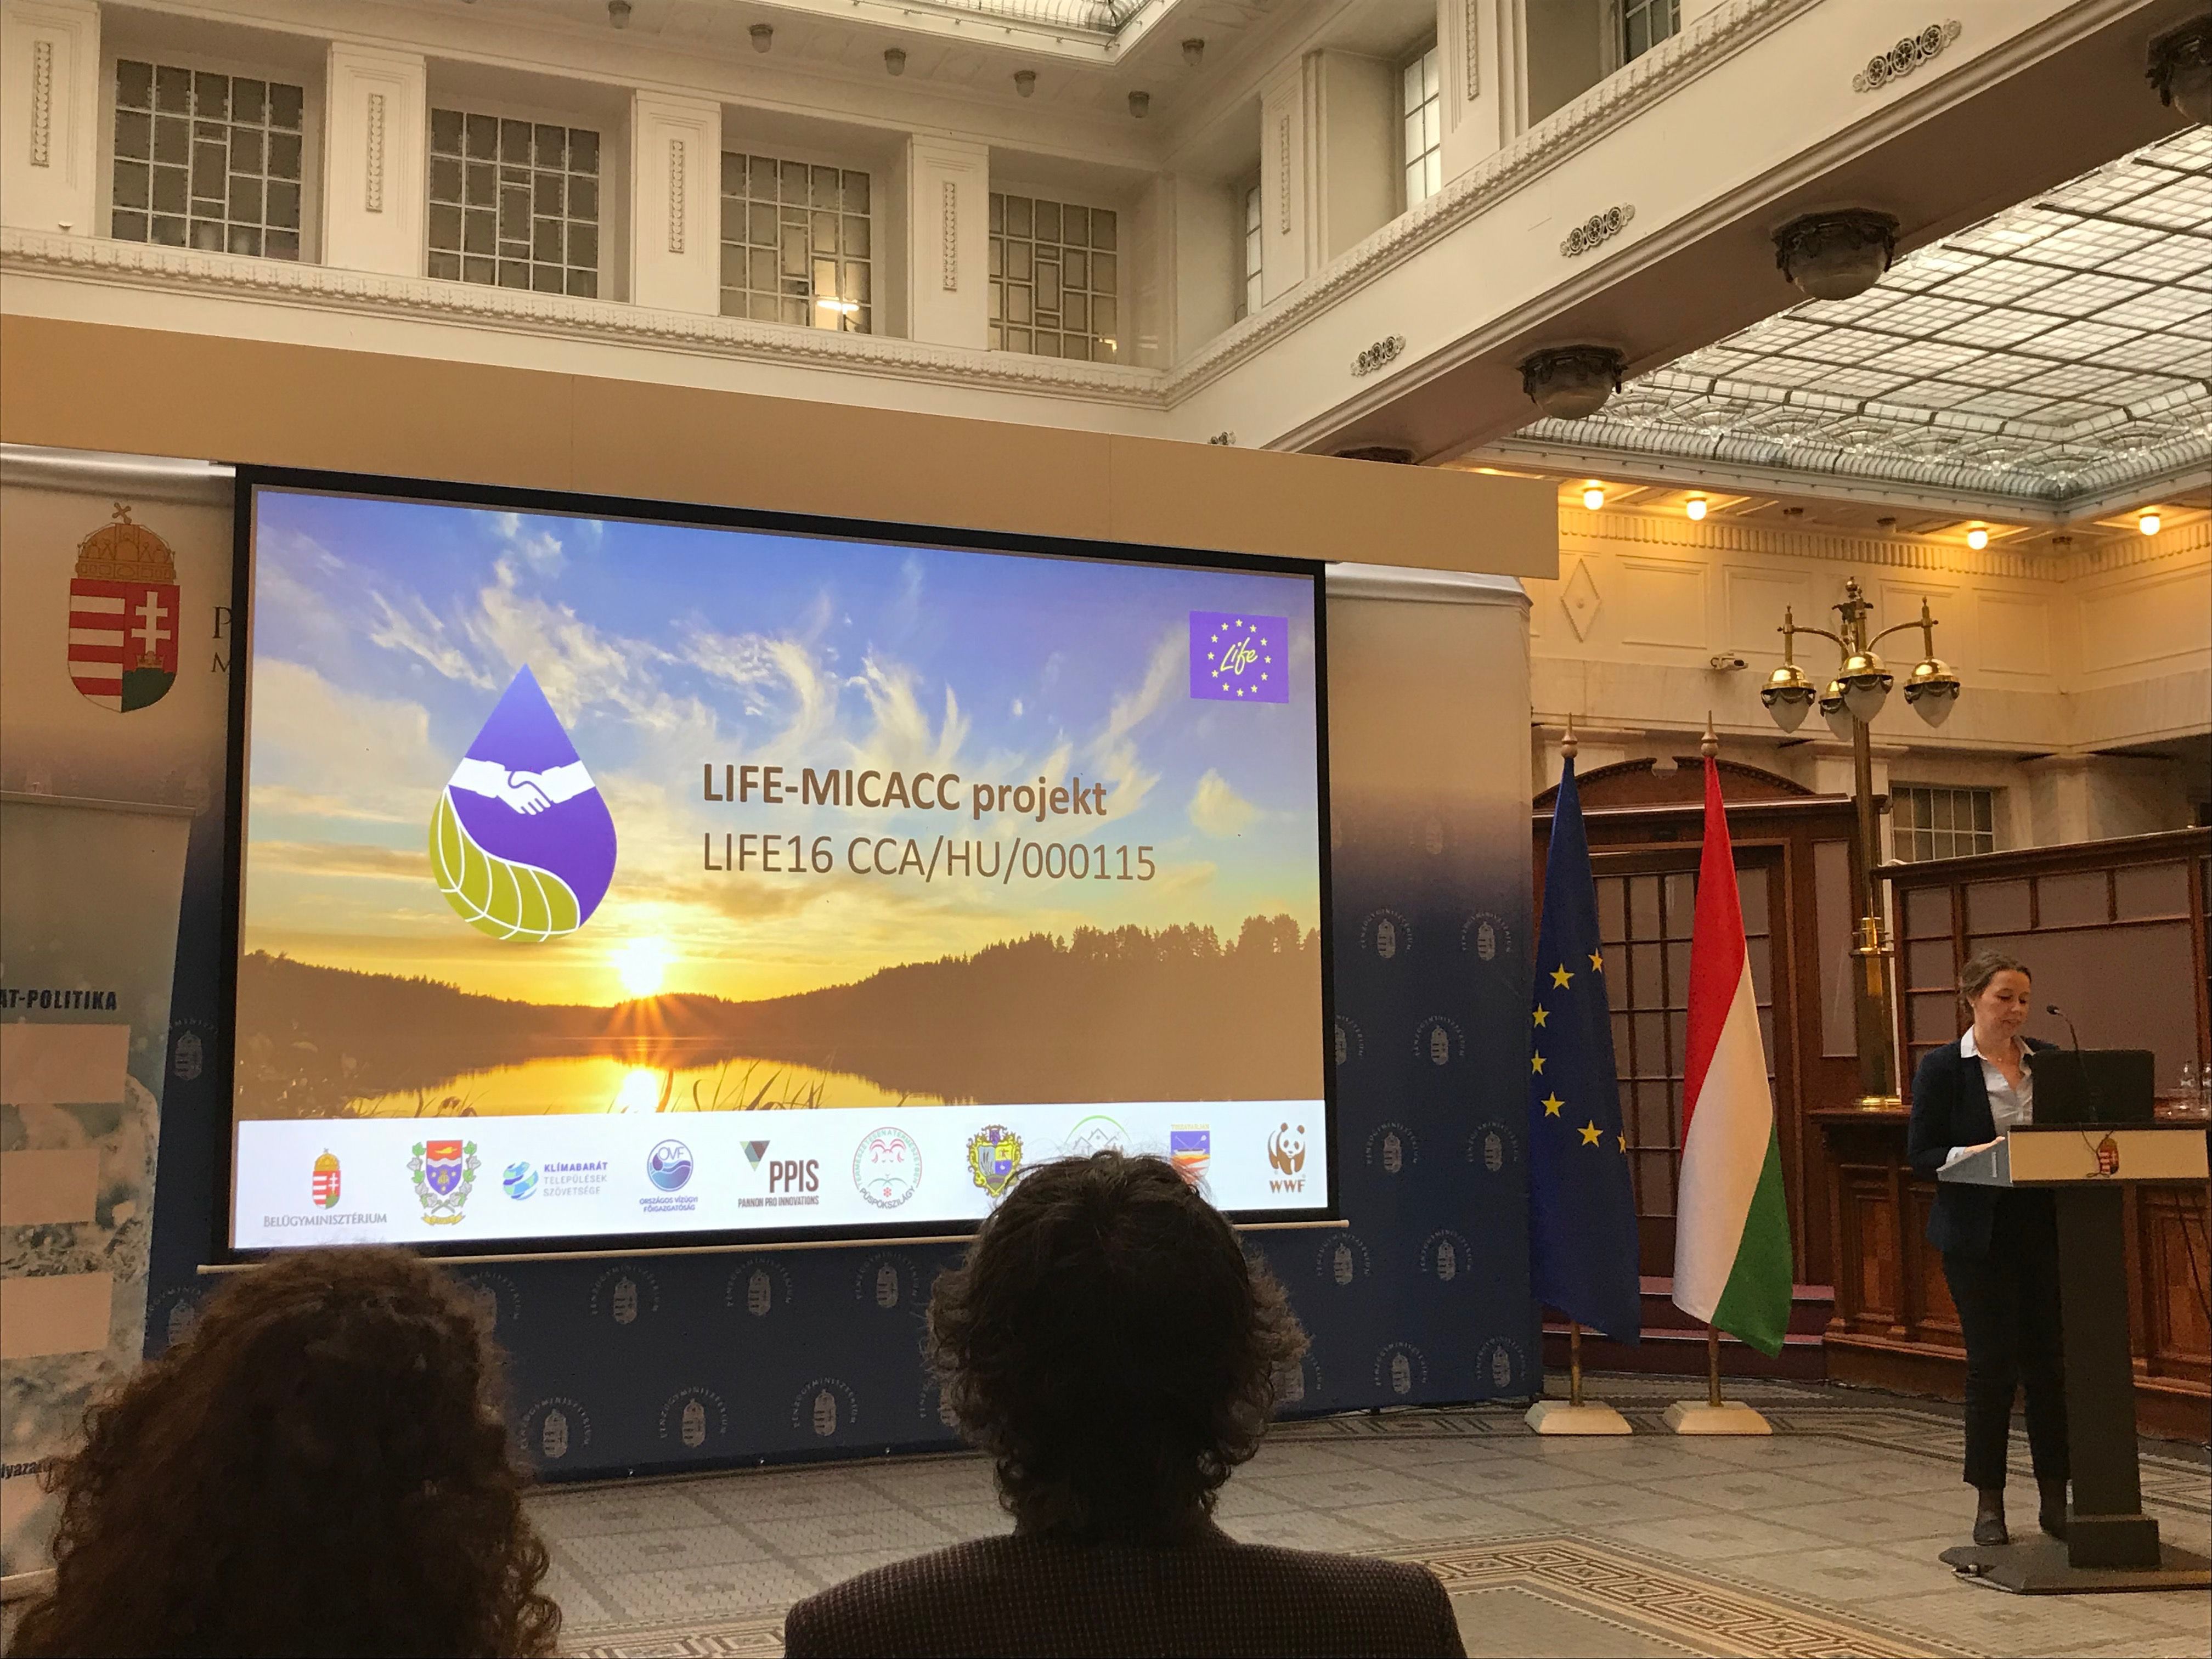 Introducing the LIFE-MICACC project, presentation by Zsuzsanna Hercig